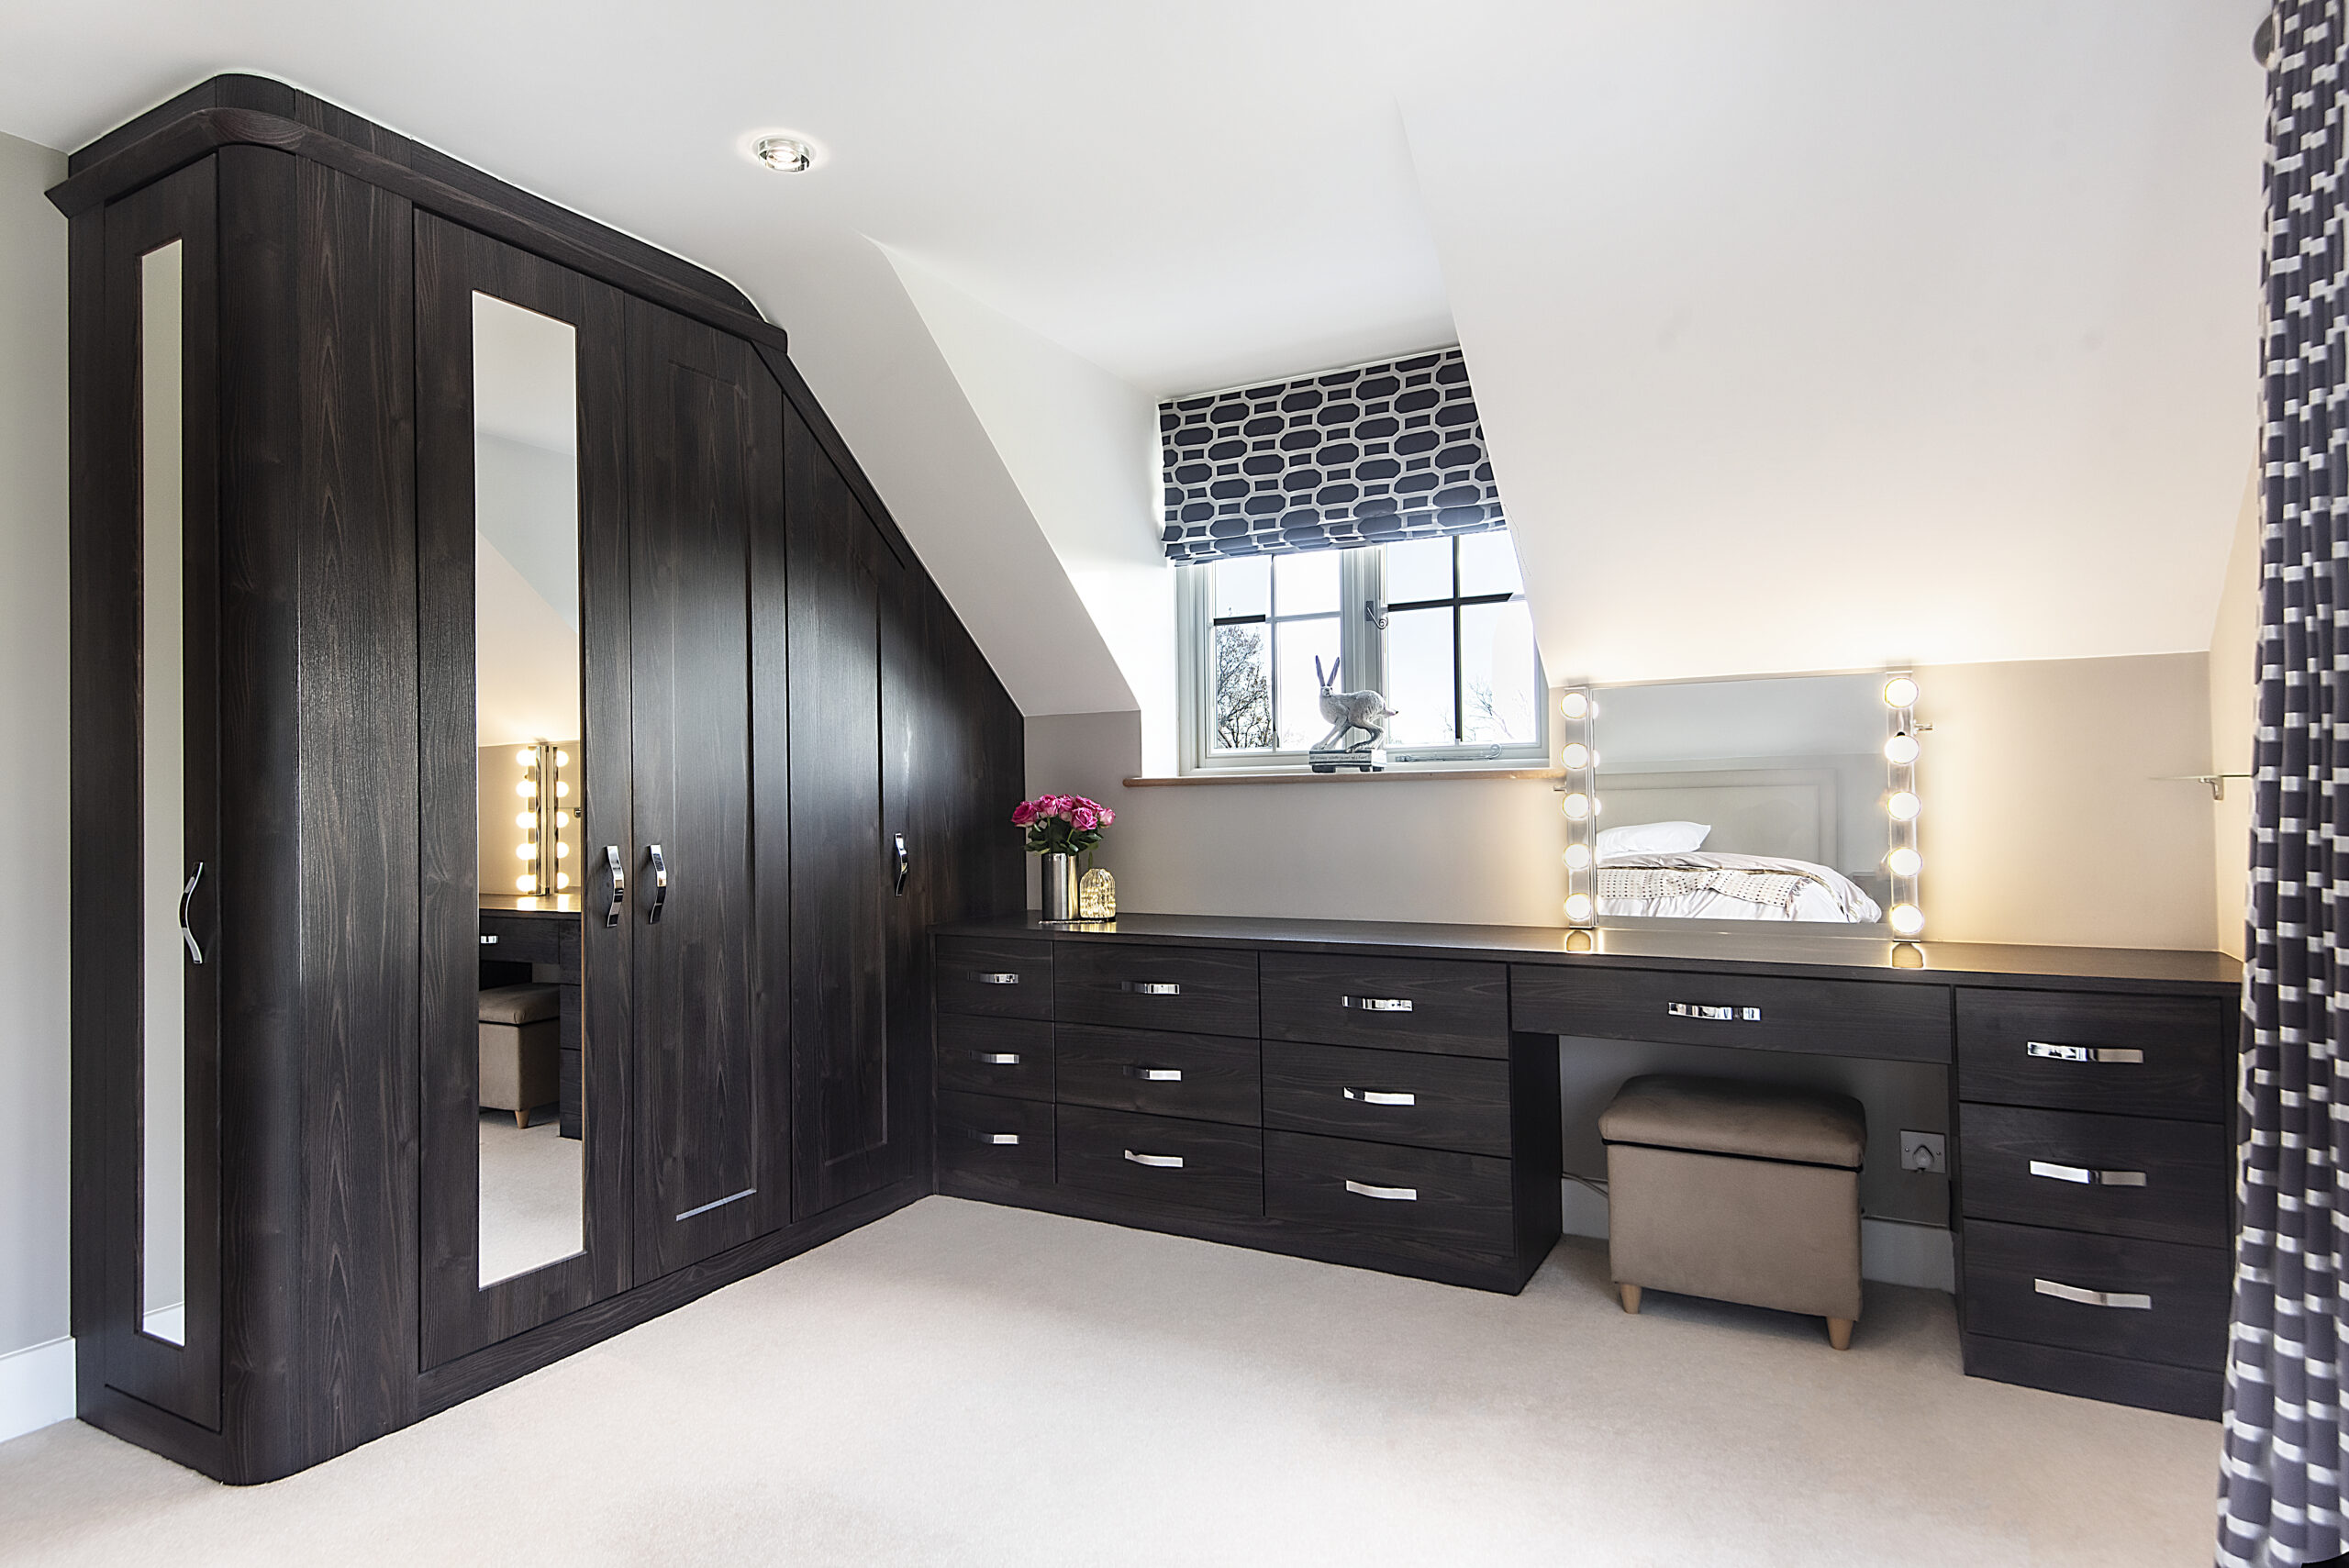 Fitted bedroom wardrobes